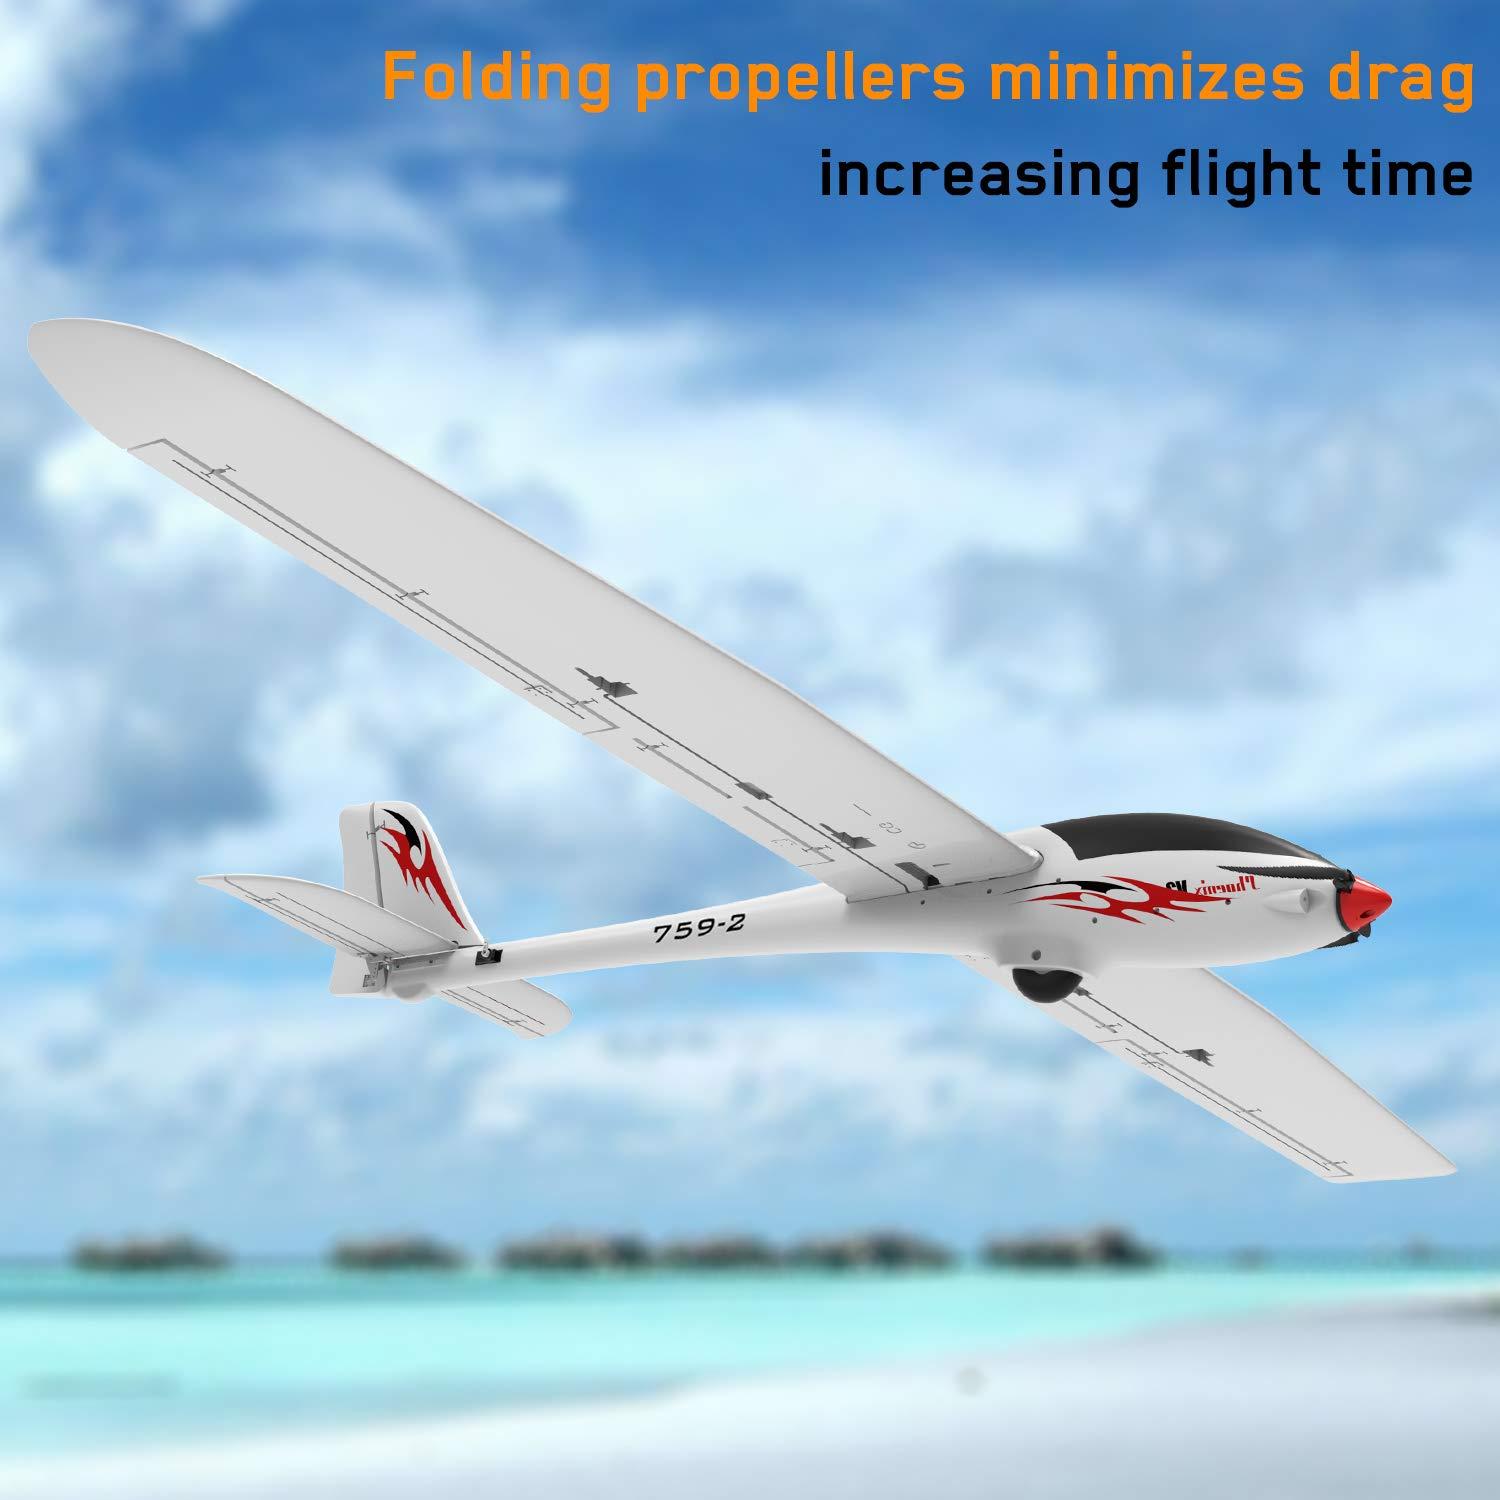 Phoenix 2000 Rc Glider: Enhance Your RC Flying Experience: Accessories and Resources for the Phoenix 2000 Glider